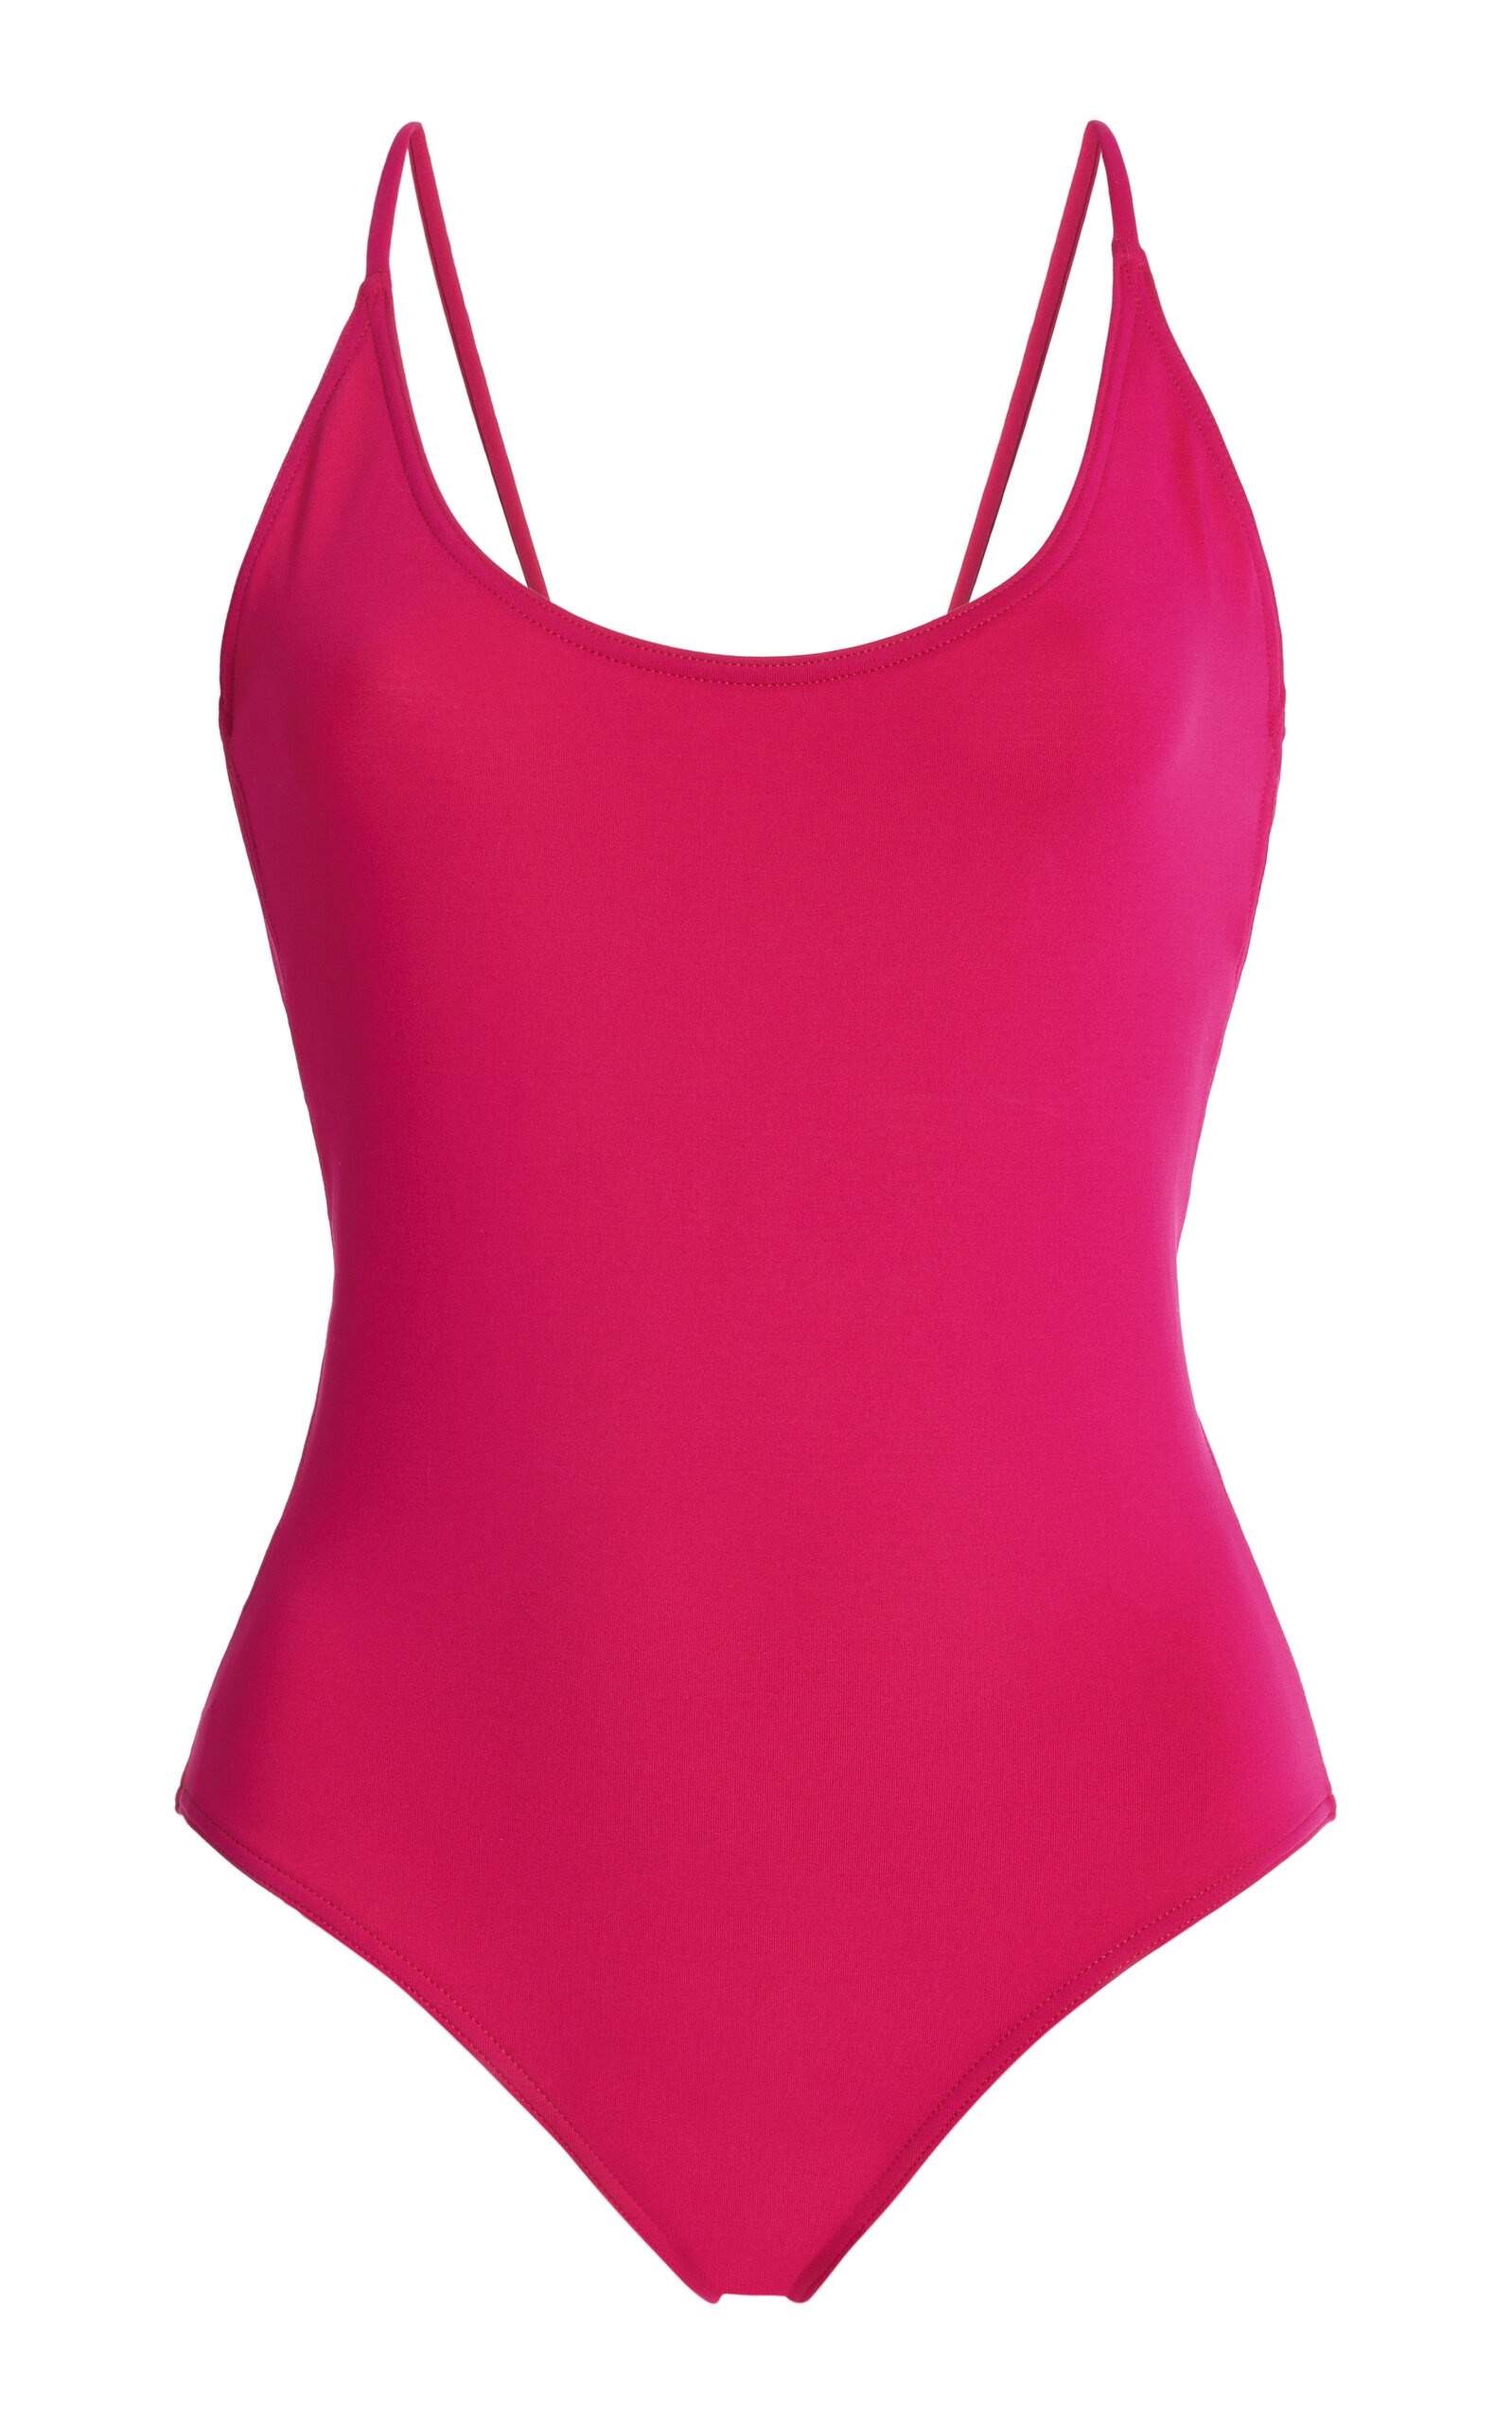 Cosmic One-Piece Swimsuit pink - 1